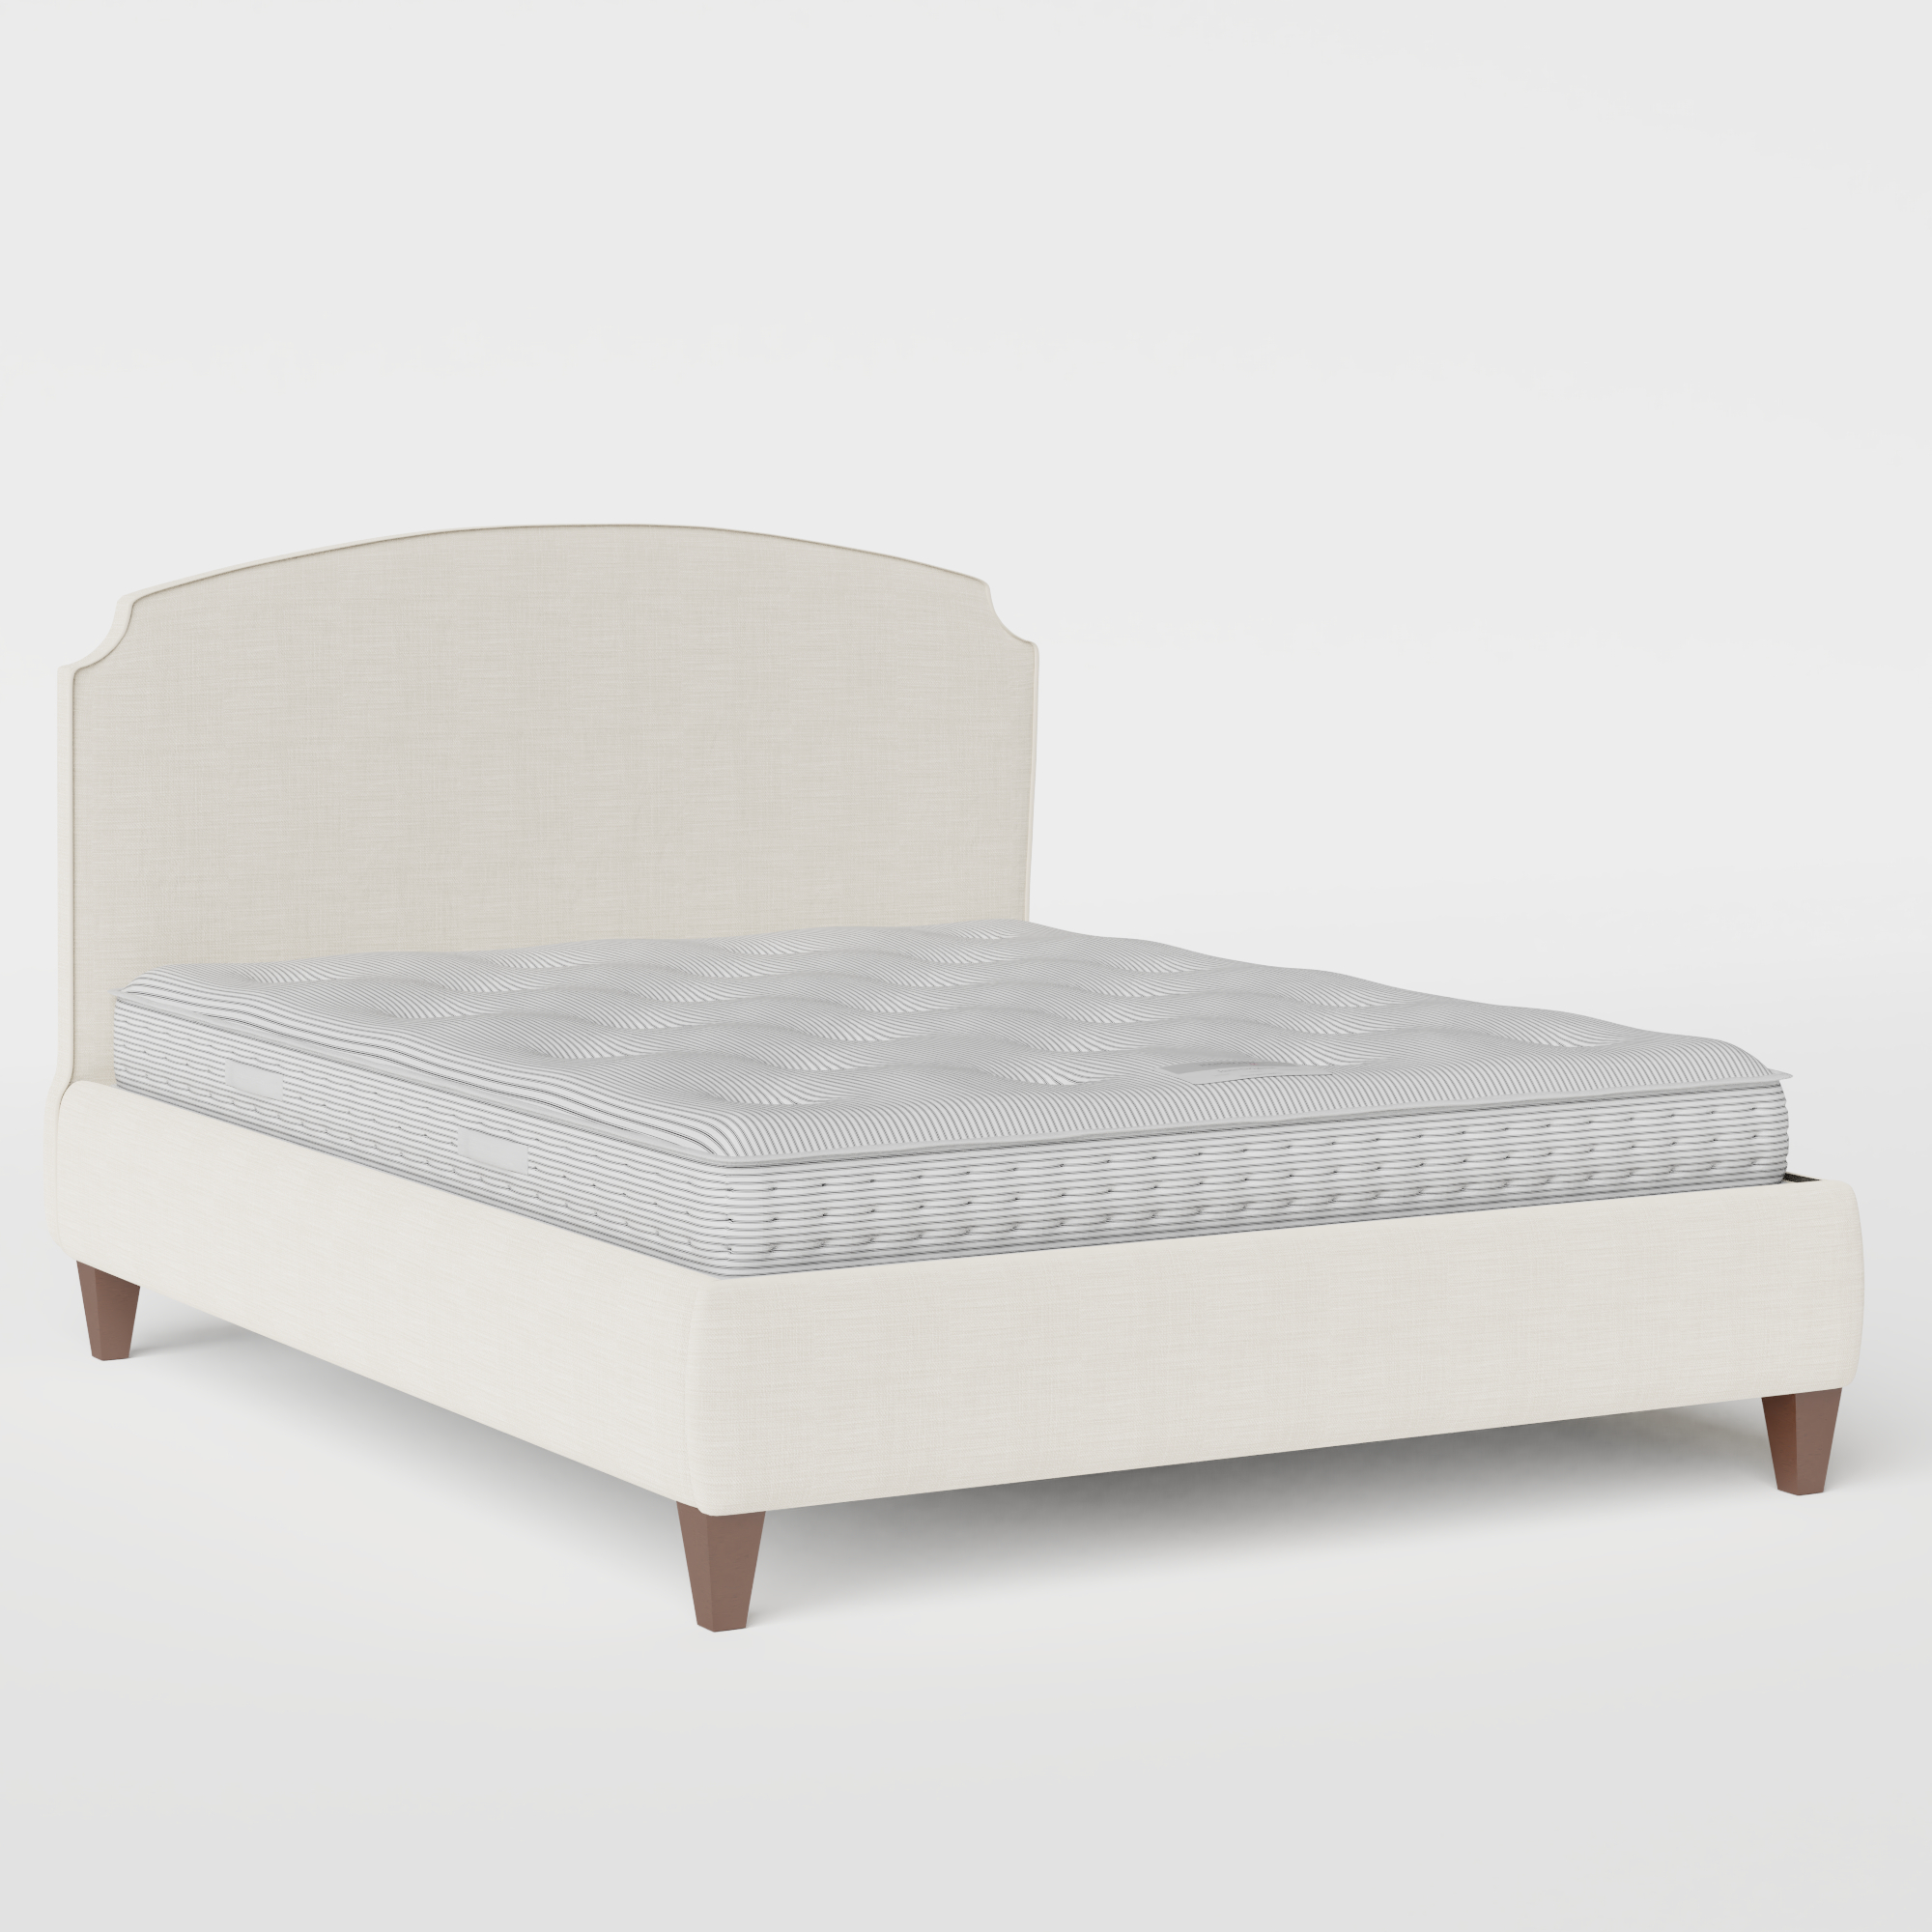 Lide with Piping - Upholstered Bed Frame - The Original Bed Co - UK